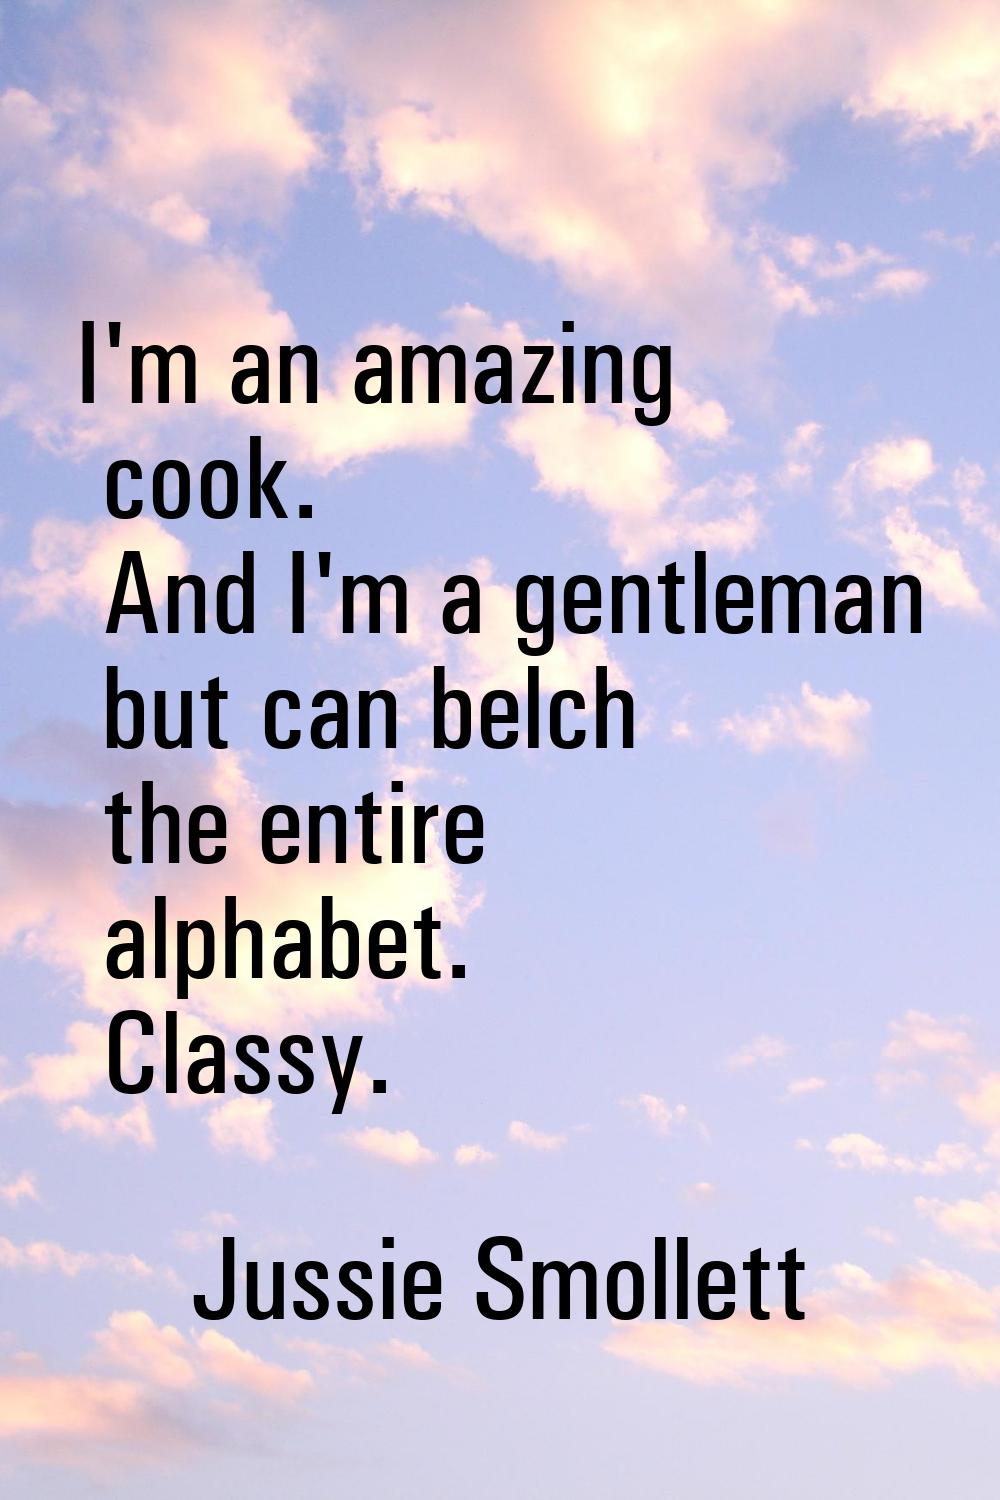 I'm an amazing cook. And I'm a gentleman but can belch the entire alphabet. Classy.